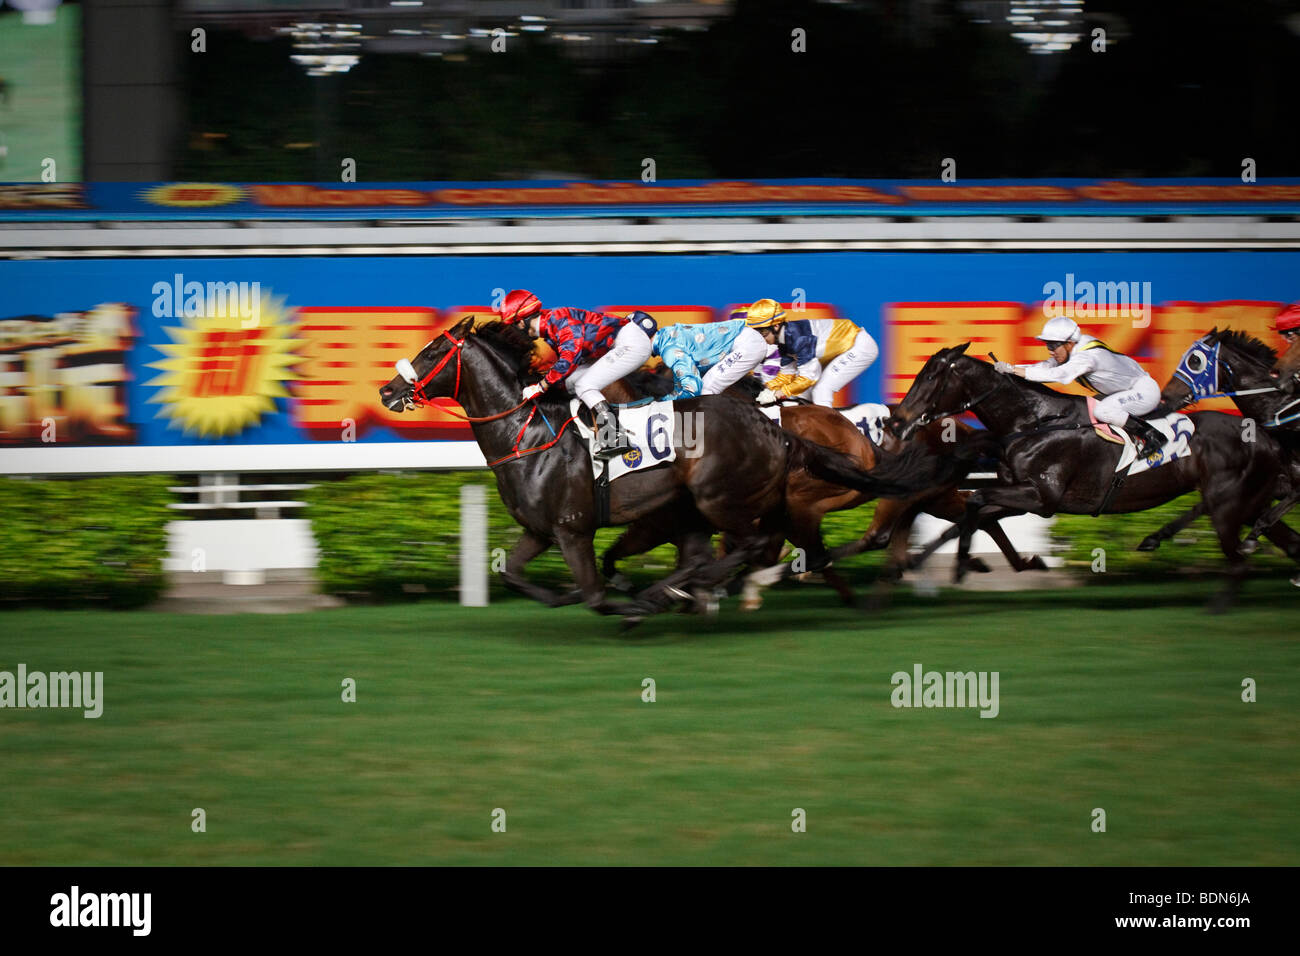 A final gallop to the finish at a night horse racing event at Happy Valley race course in Hong Kong. Stock Photo